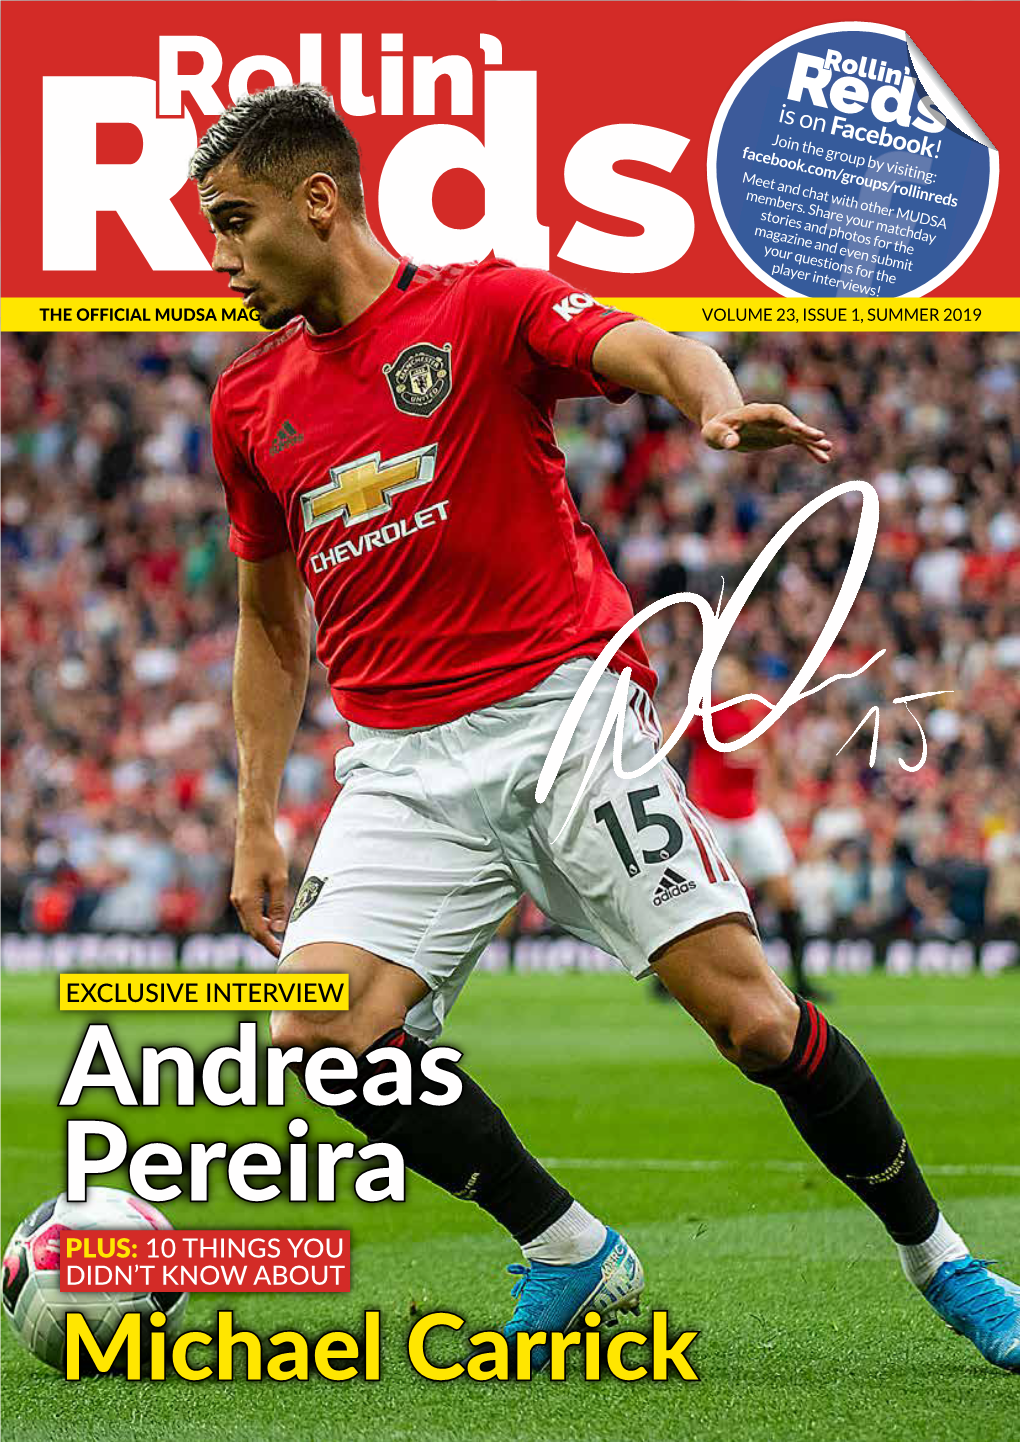 Andreas Pereira PLUS: 10 THINGS YOU DIDN’T KNOW ABOUT Michael Carrick 2 CONTENTS CONTENTS 3